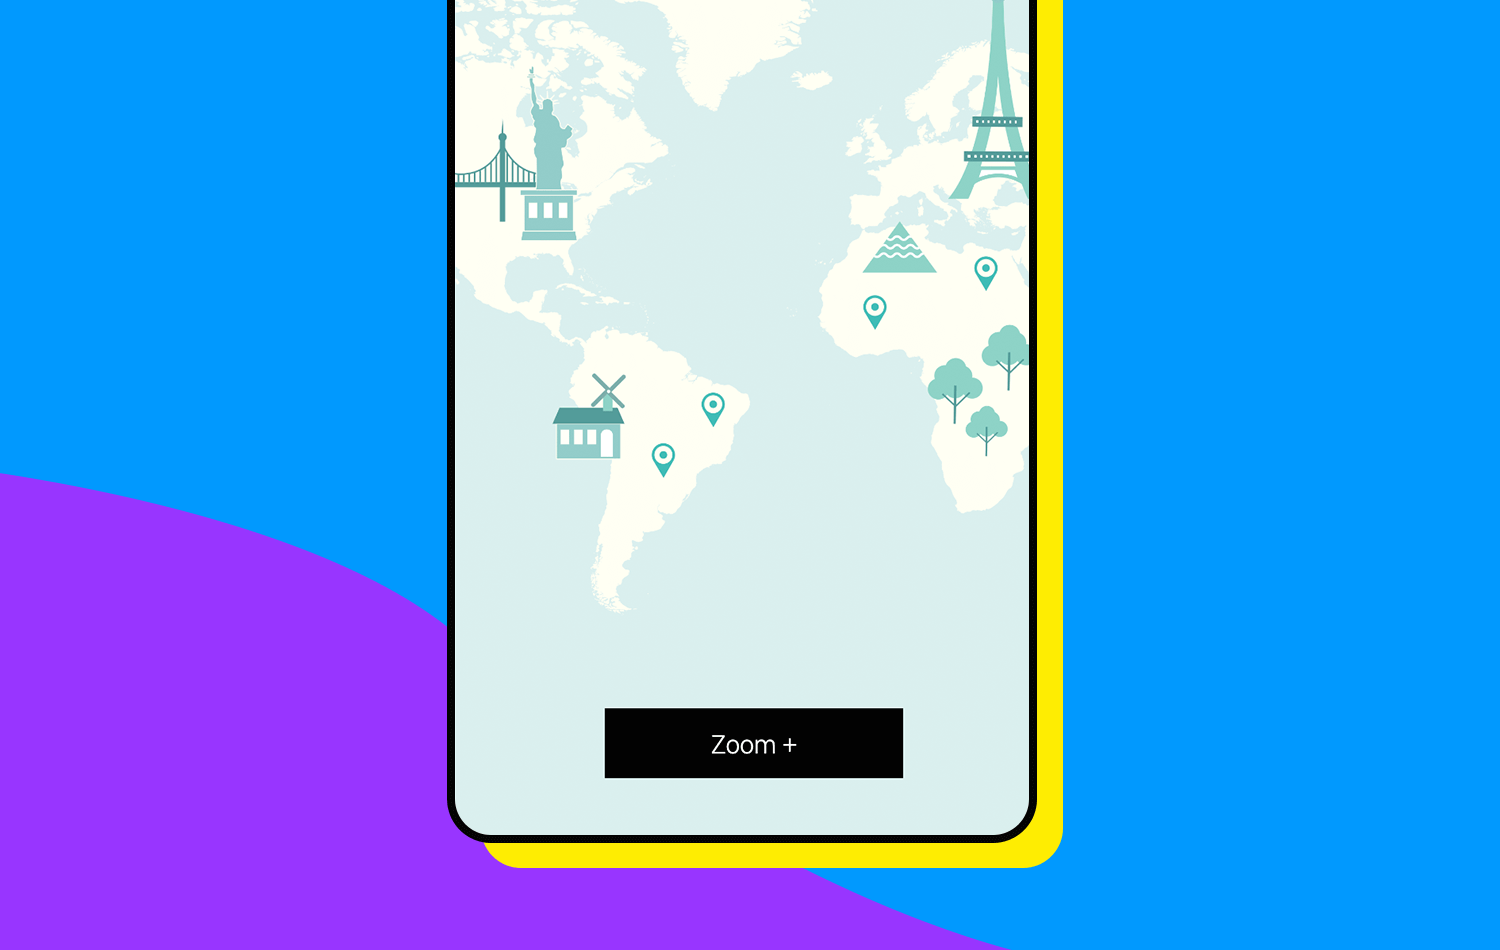 Zoom and pan map feature with world landmarks